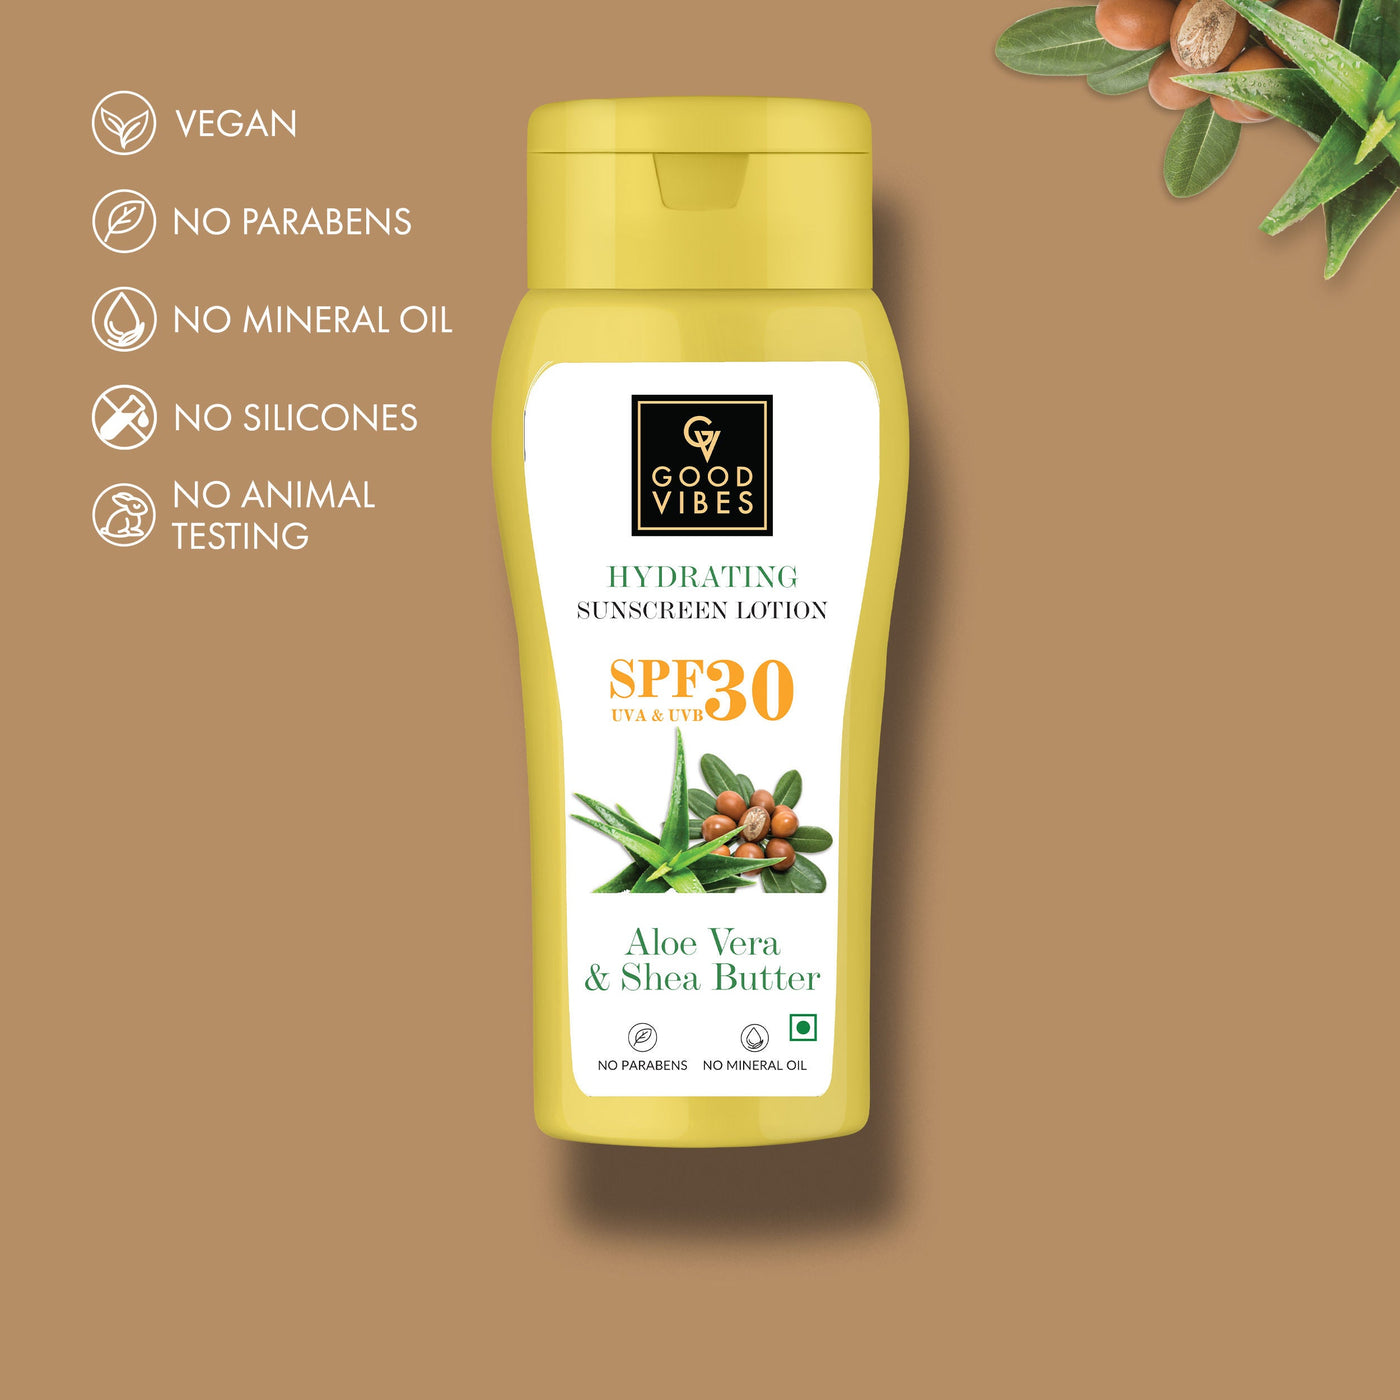 good-vibes-hydrating-sunscreen-lotion-spf-30-aloe-vera-and-shea-butter-110ml-5